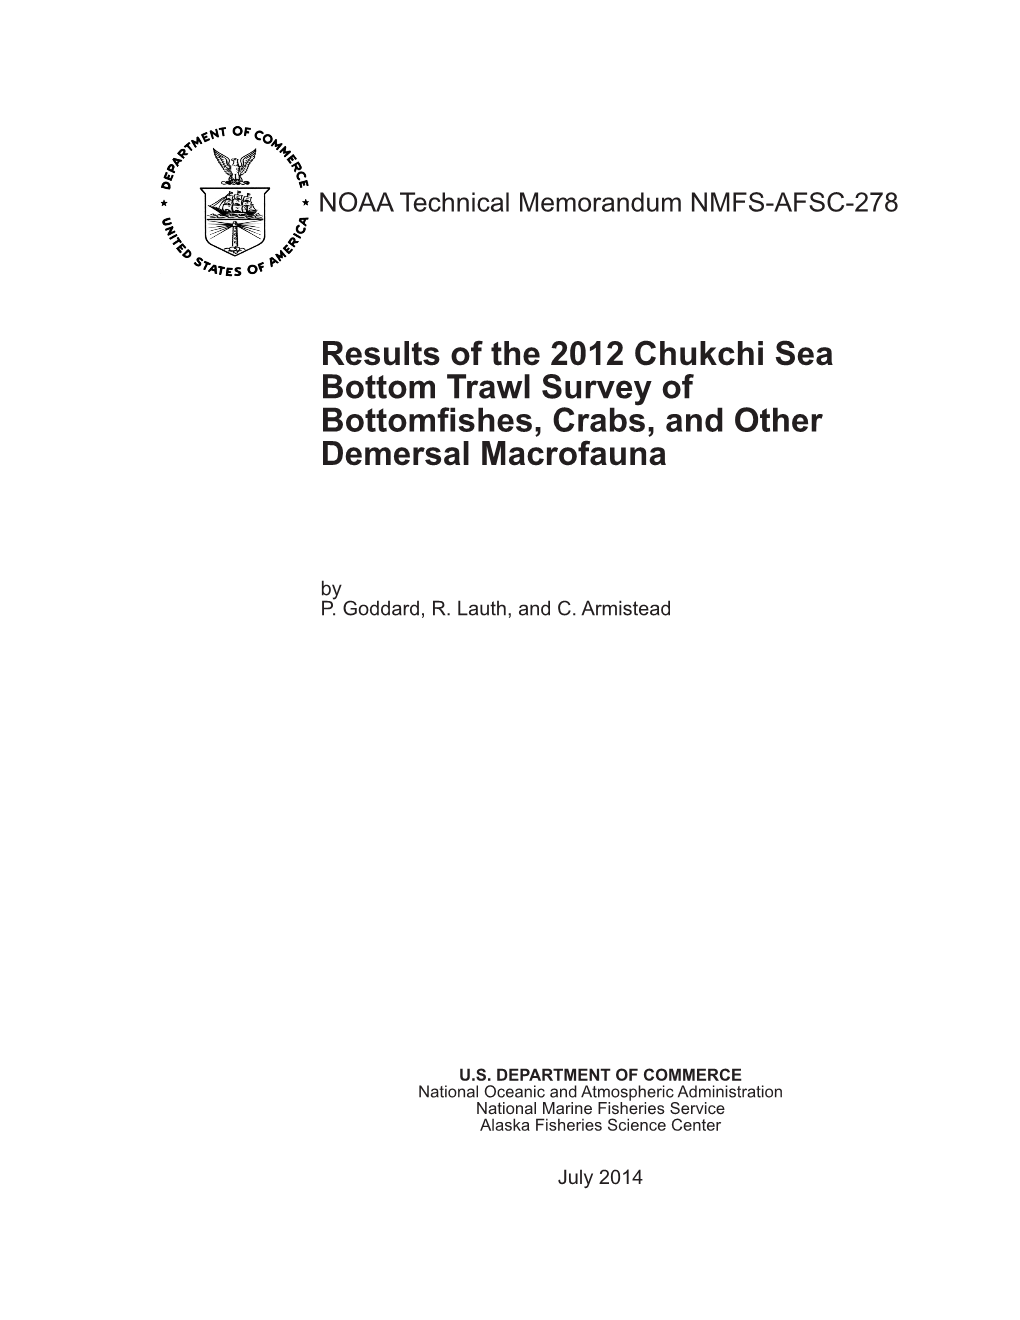 Results of the 2012 Chukchi Sea Bottom Trawl Survey of Bottomfishes, Crabs, and Other Demersal Macrofauna